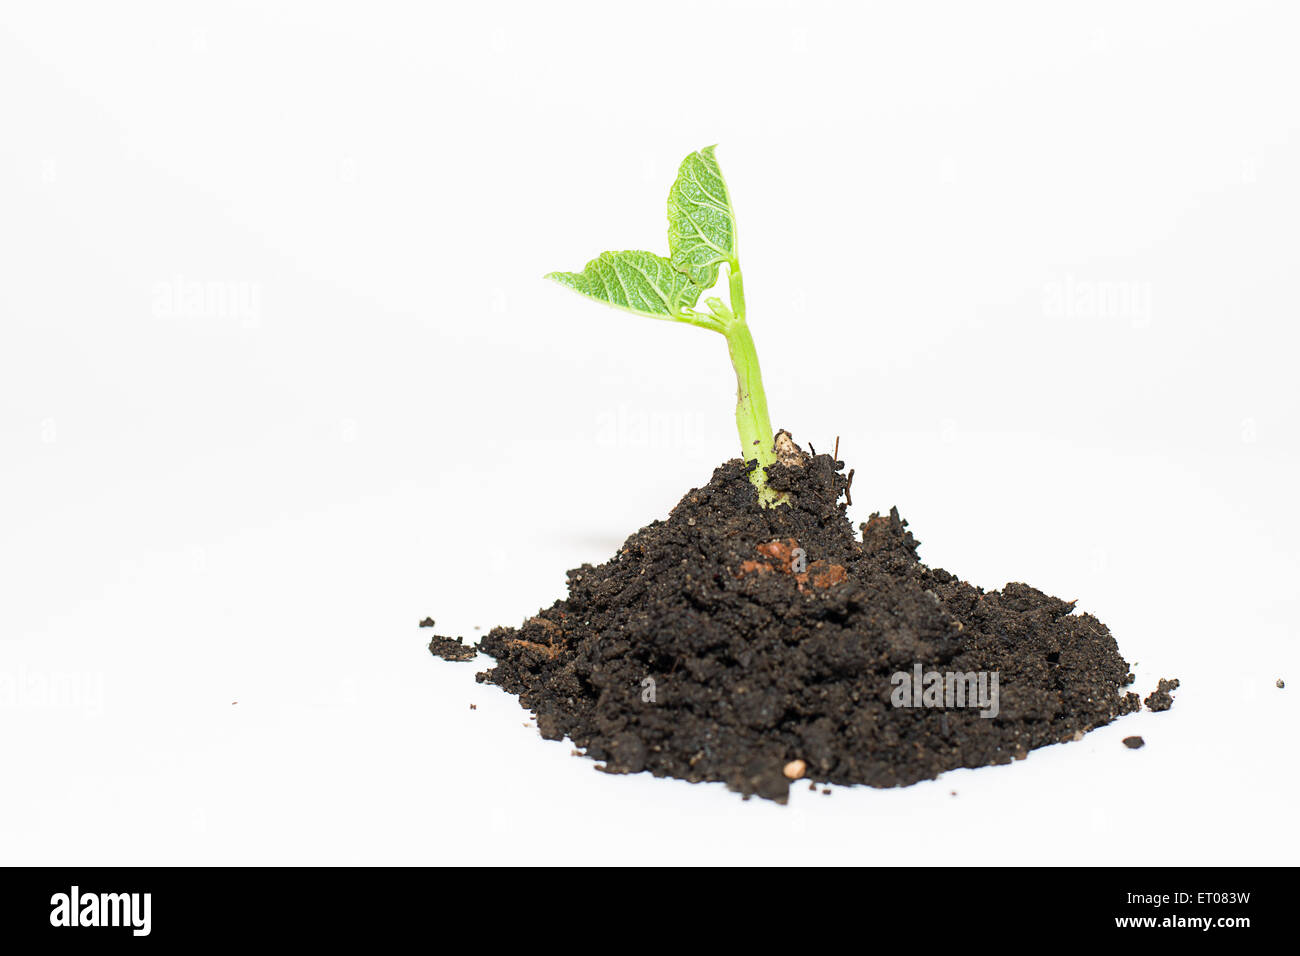 Green plant growing from a pile of soil on a white background Stock Photo